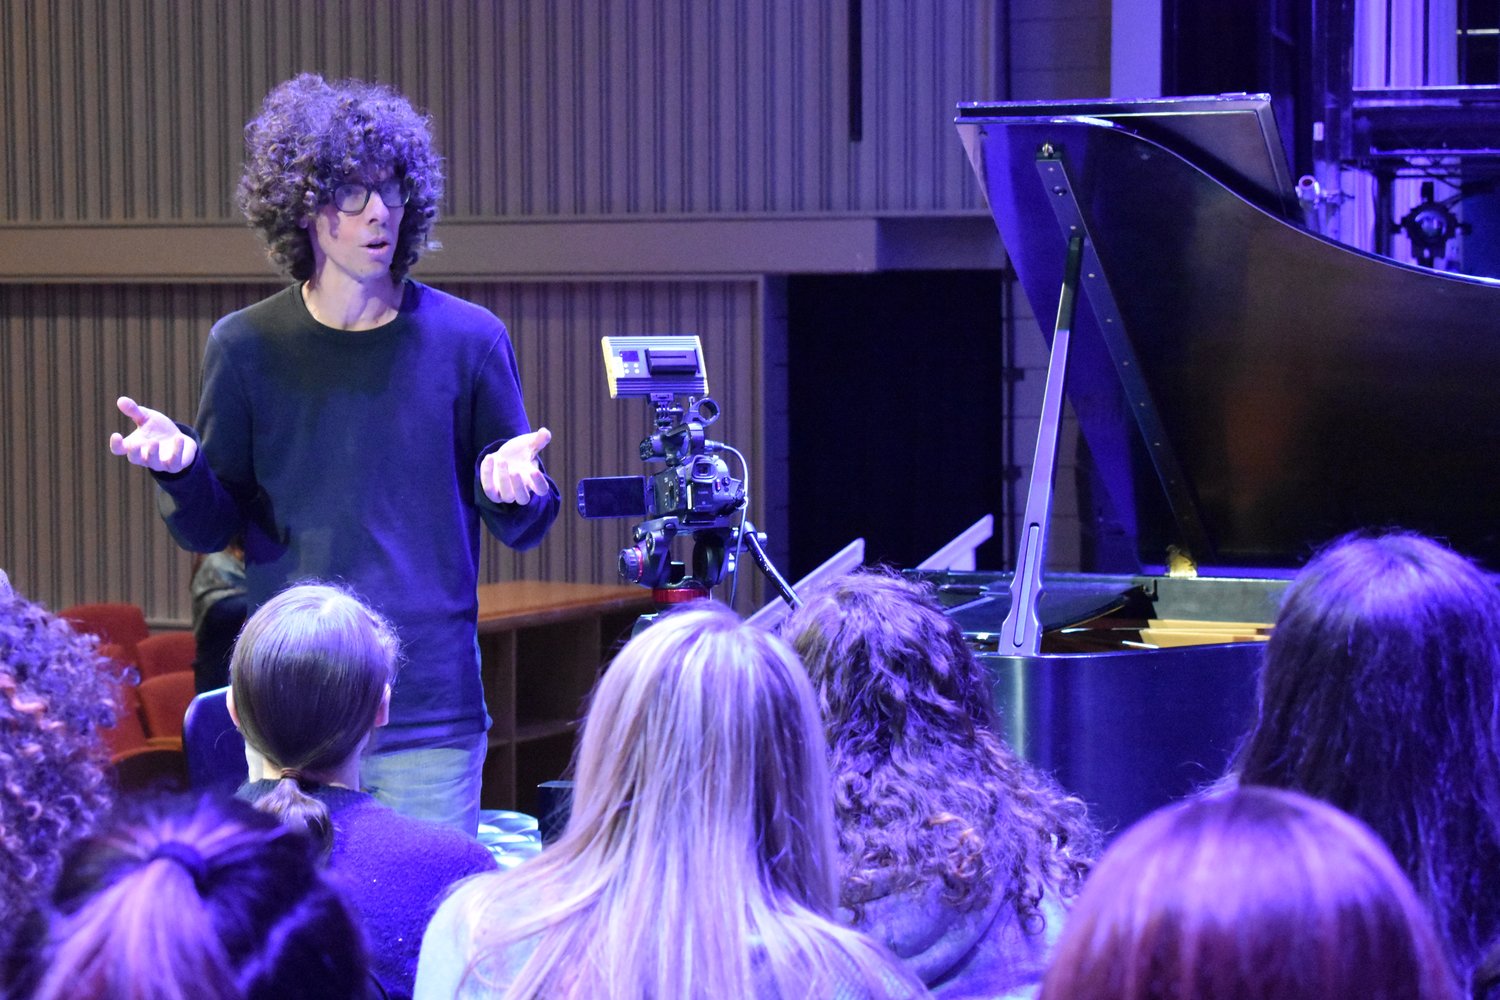 "Classical music is a bit of a hard sell, and one of the things that we want to do is change that perception," Gargiulo told the students.